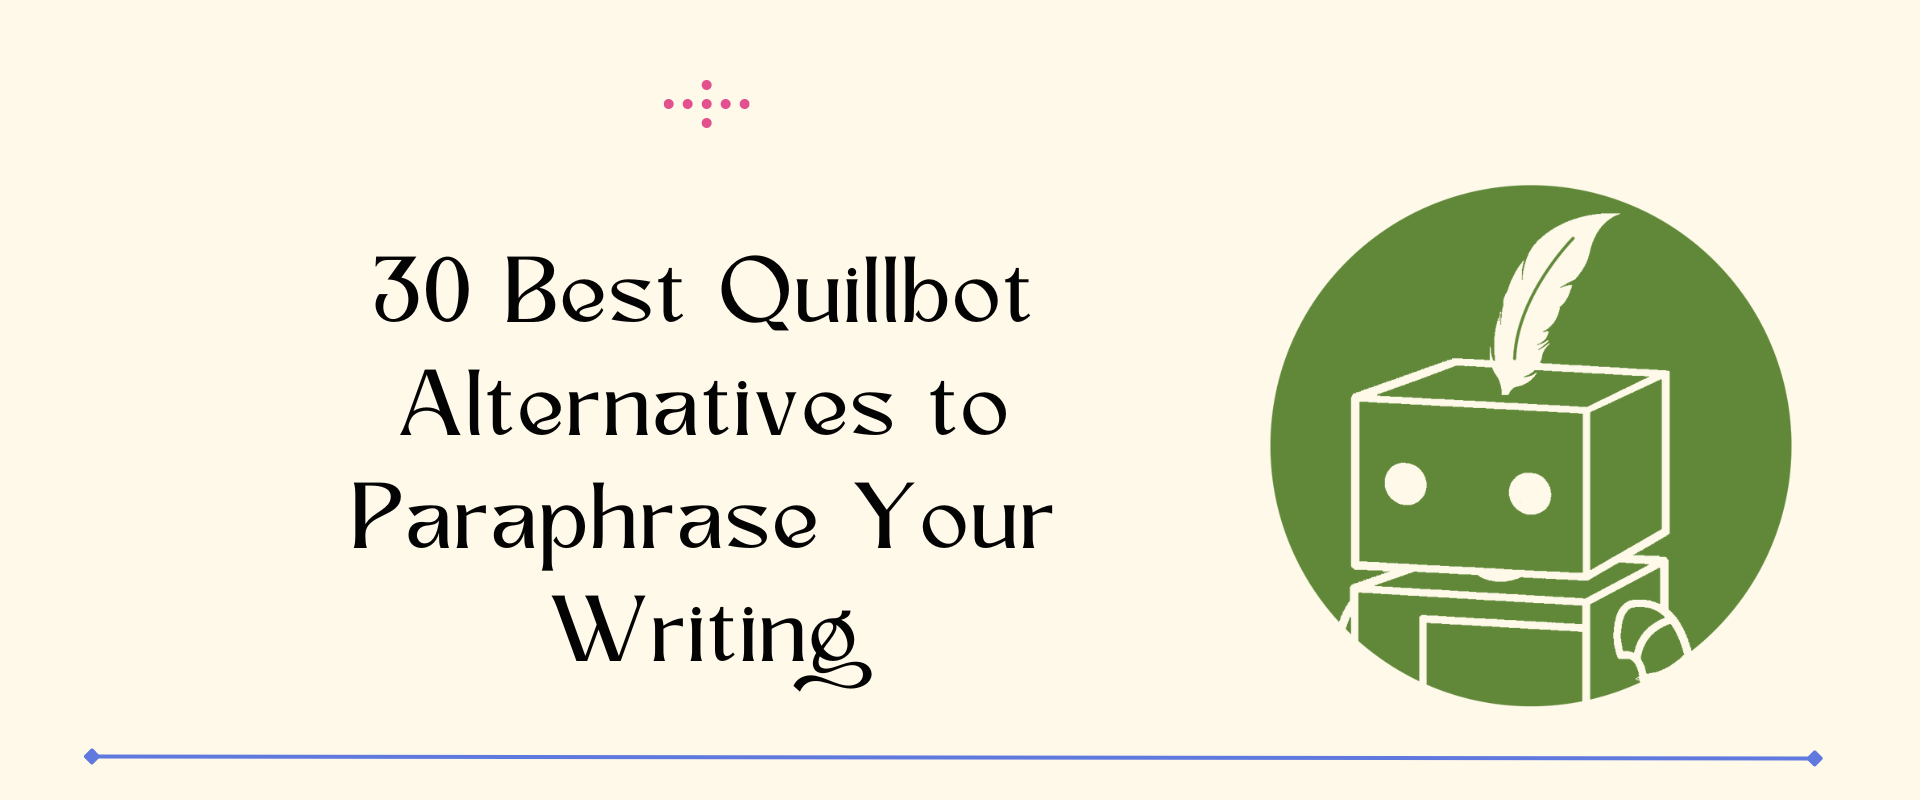 30 Best Quillbot Alternatives to Paraphrase Your Writing